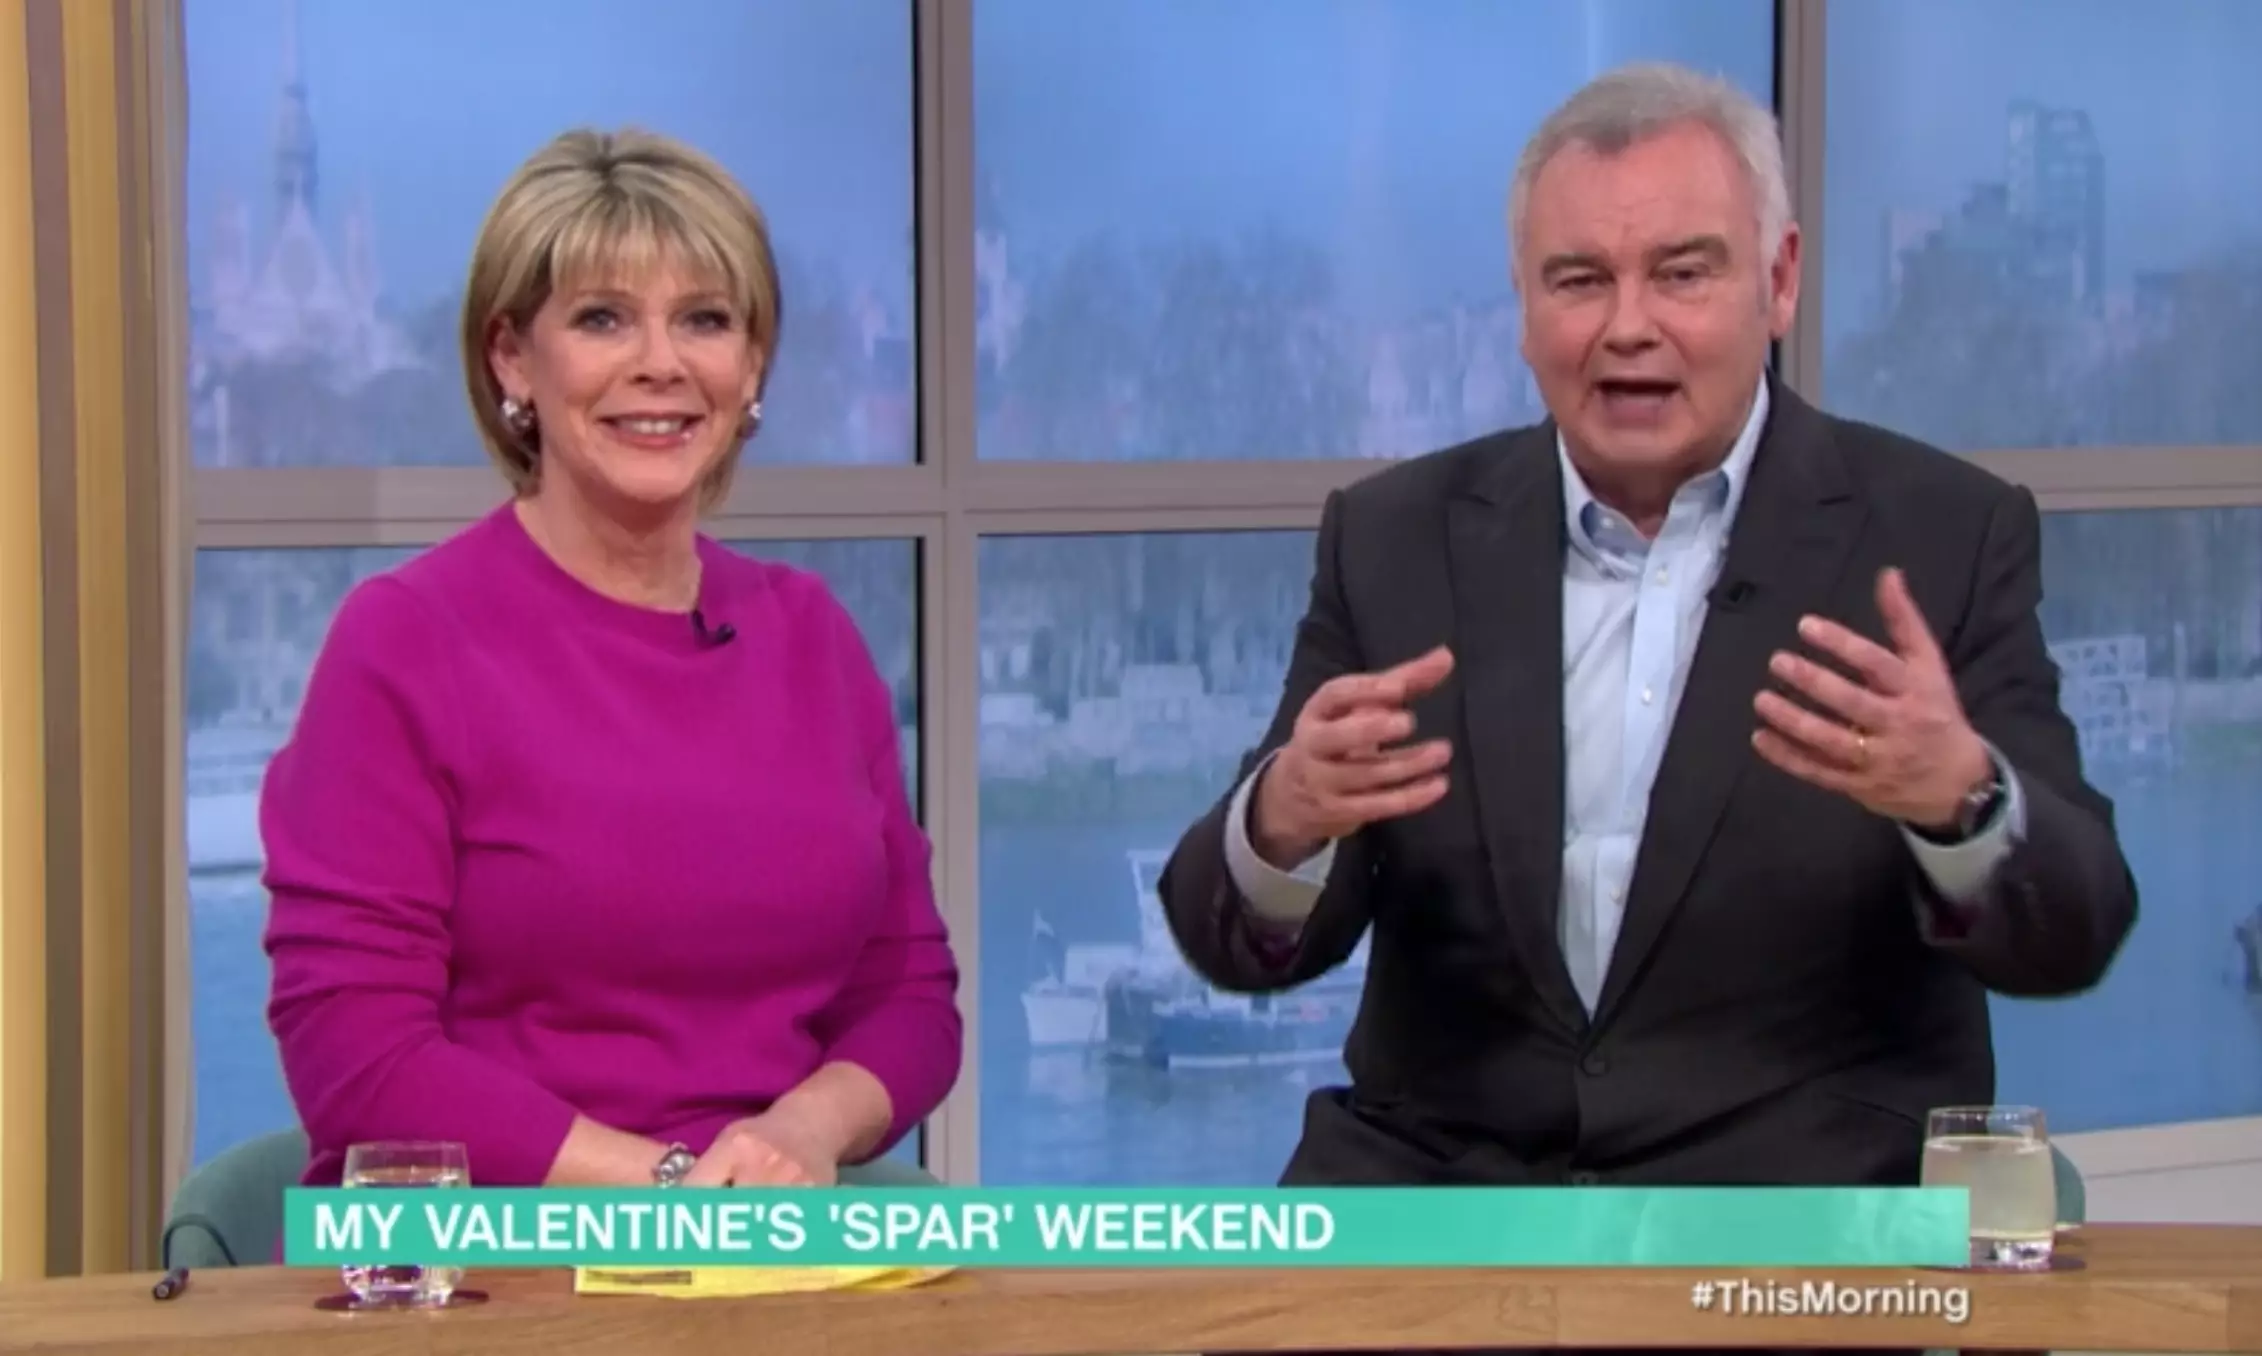 Eamonn mentioned he thought Ruth wouldn't have been best impressed had he done it to her (